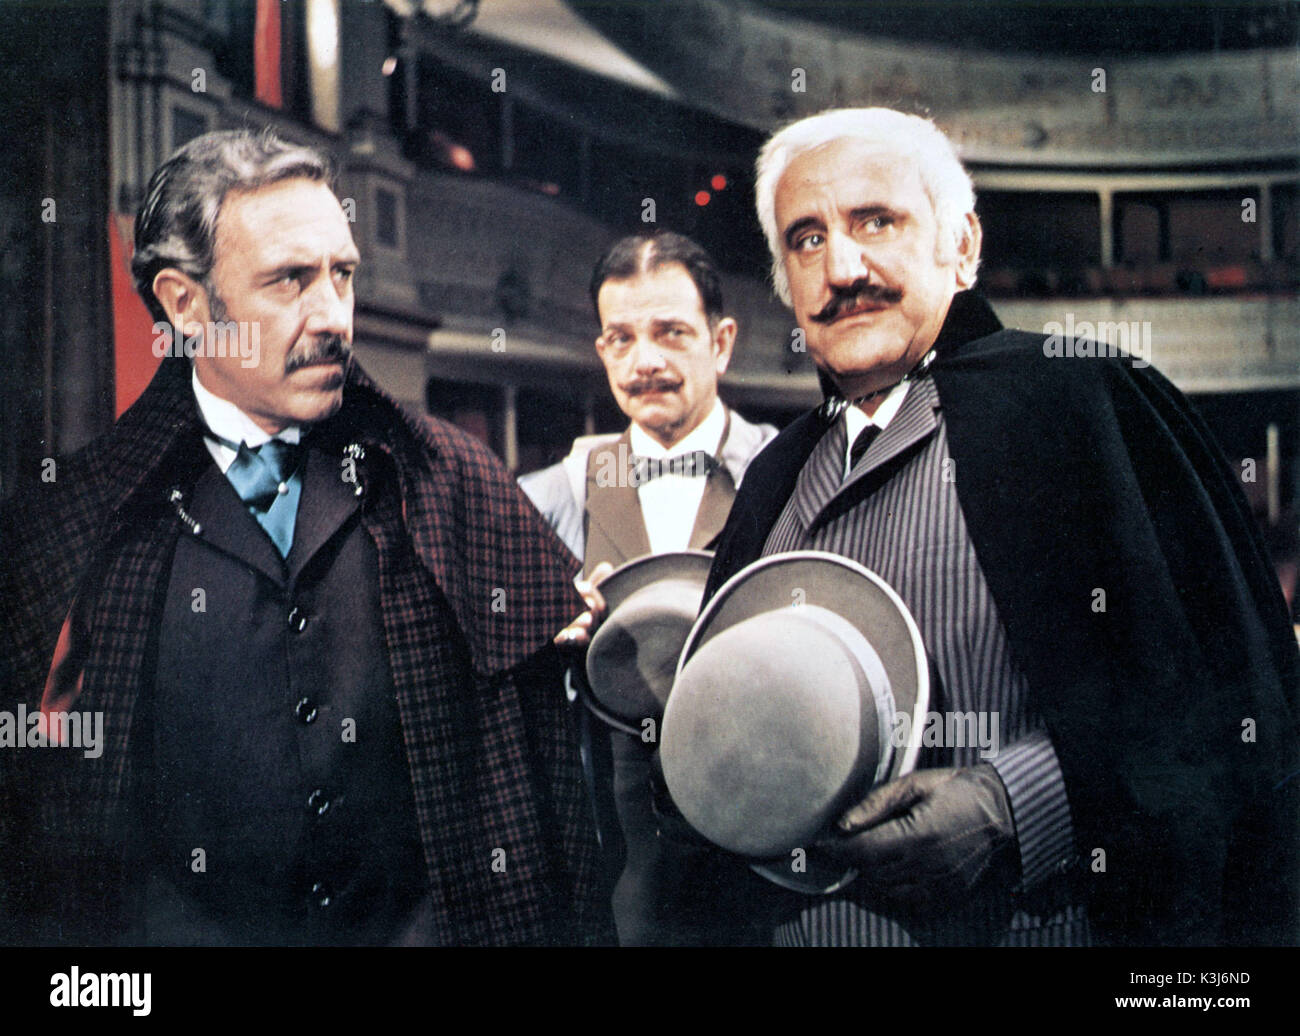 MURDERS IN THE RUE MORGUE JASON ROBARDS, PETER ARNE, ADOLFO CELI     Date: 1971 Stock Photo